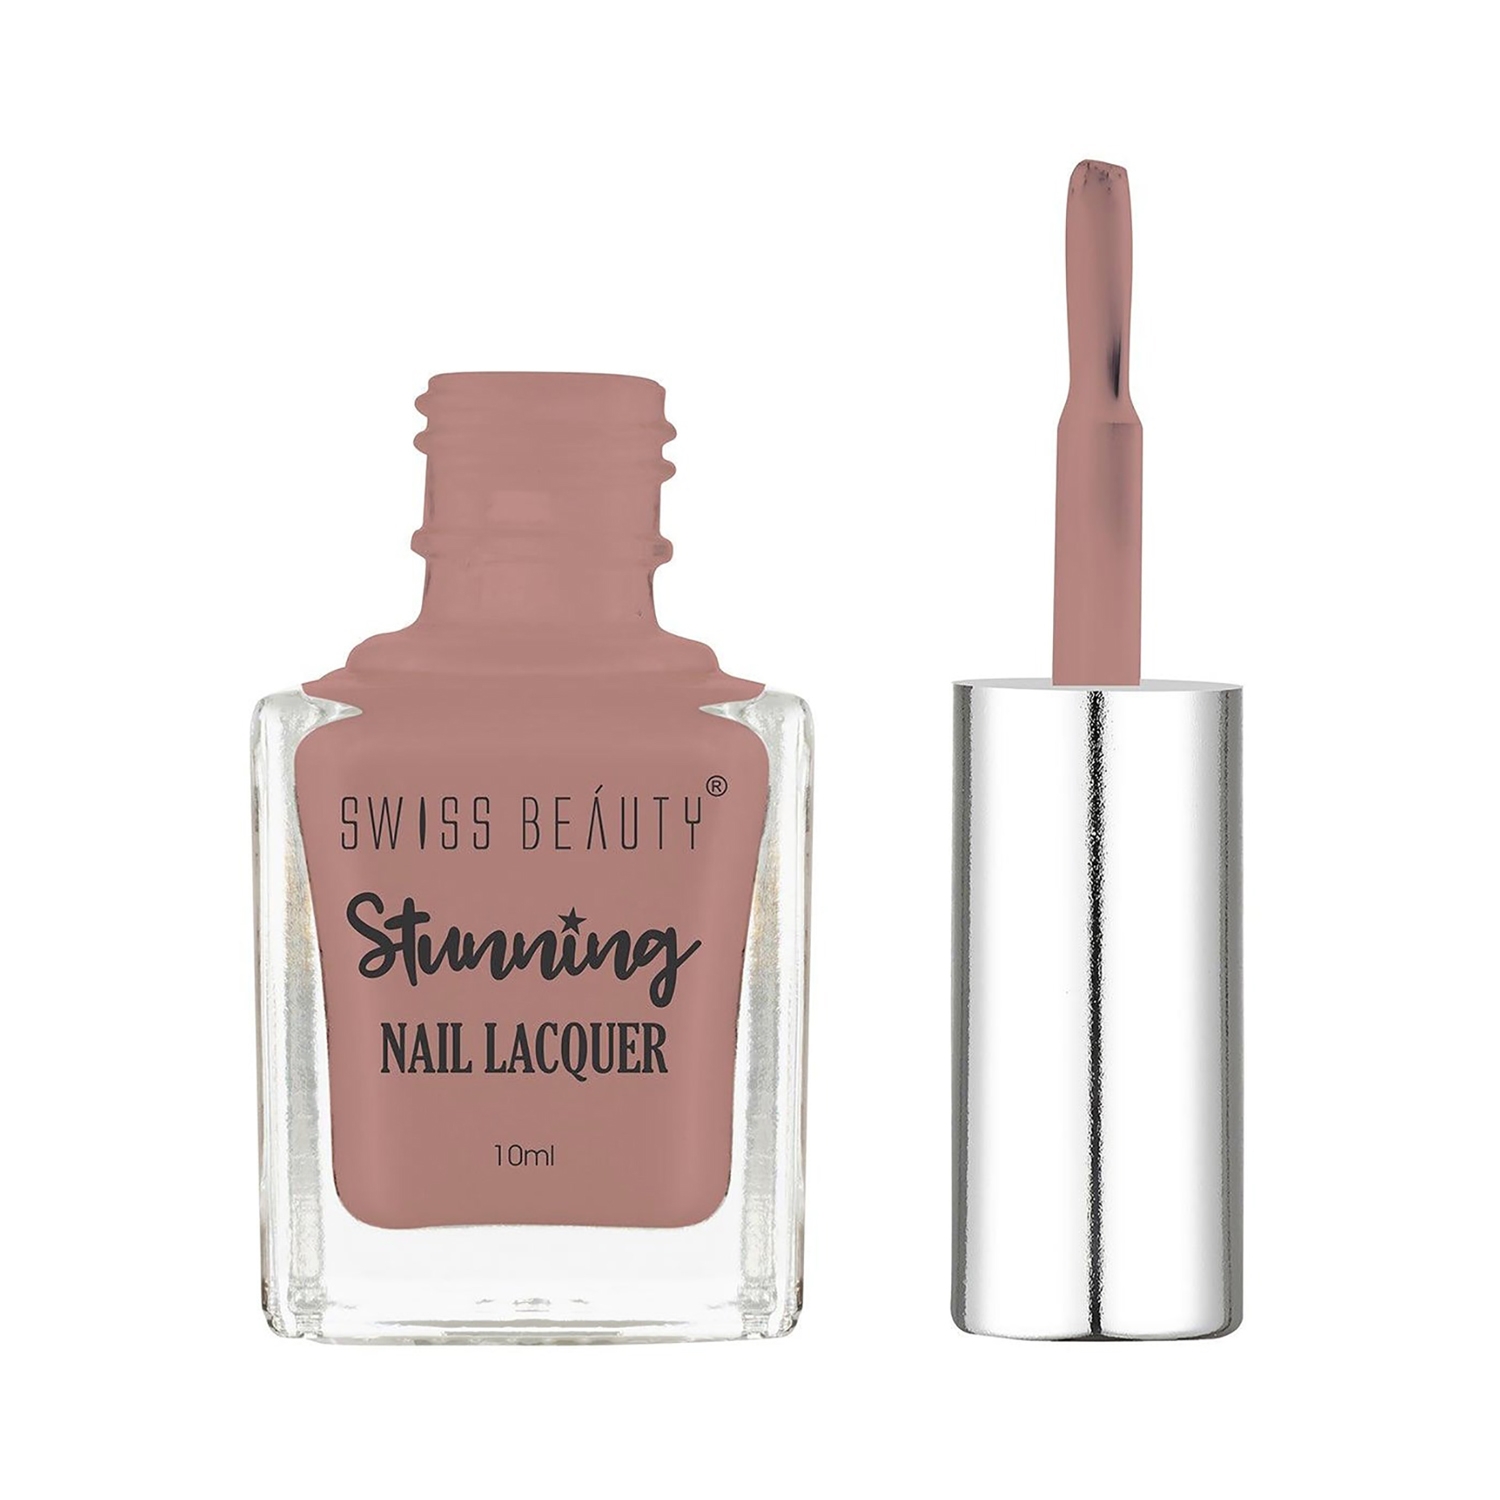 Buy Swiss Beauty Color Splash Nail Polish with Glossy Gel Finish |  Non-Chipping, Quick drying, Long-Lasting Nail paint | Shade- 52, 15ml  Online at Low Prices in India - Amazon.in